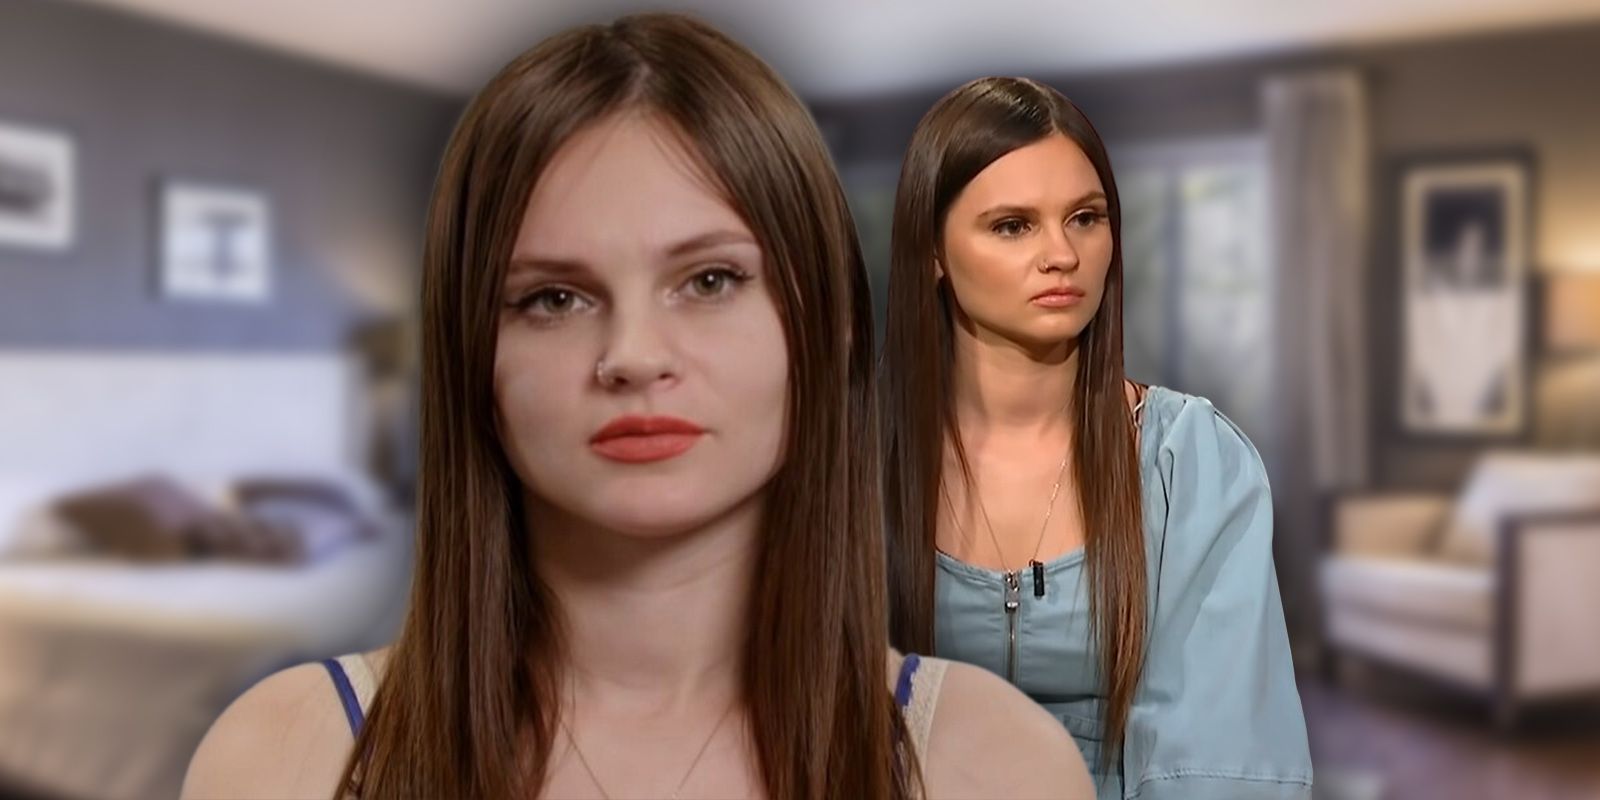 Montage of Julia Trubkina from 90 Day Fiancé